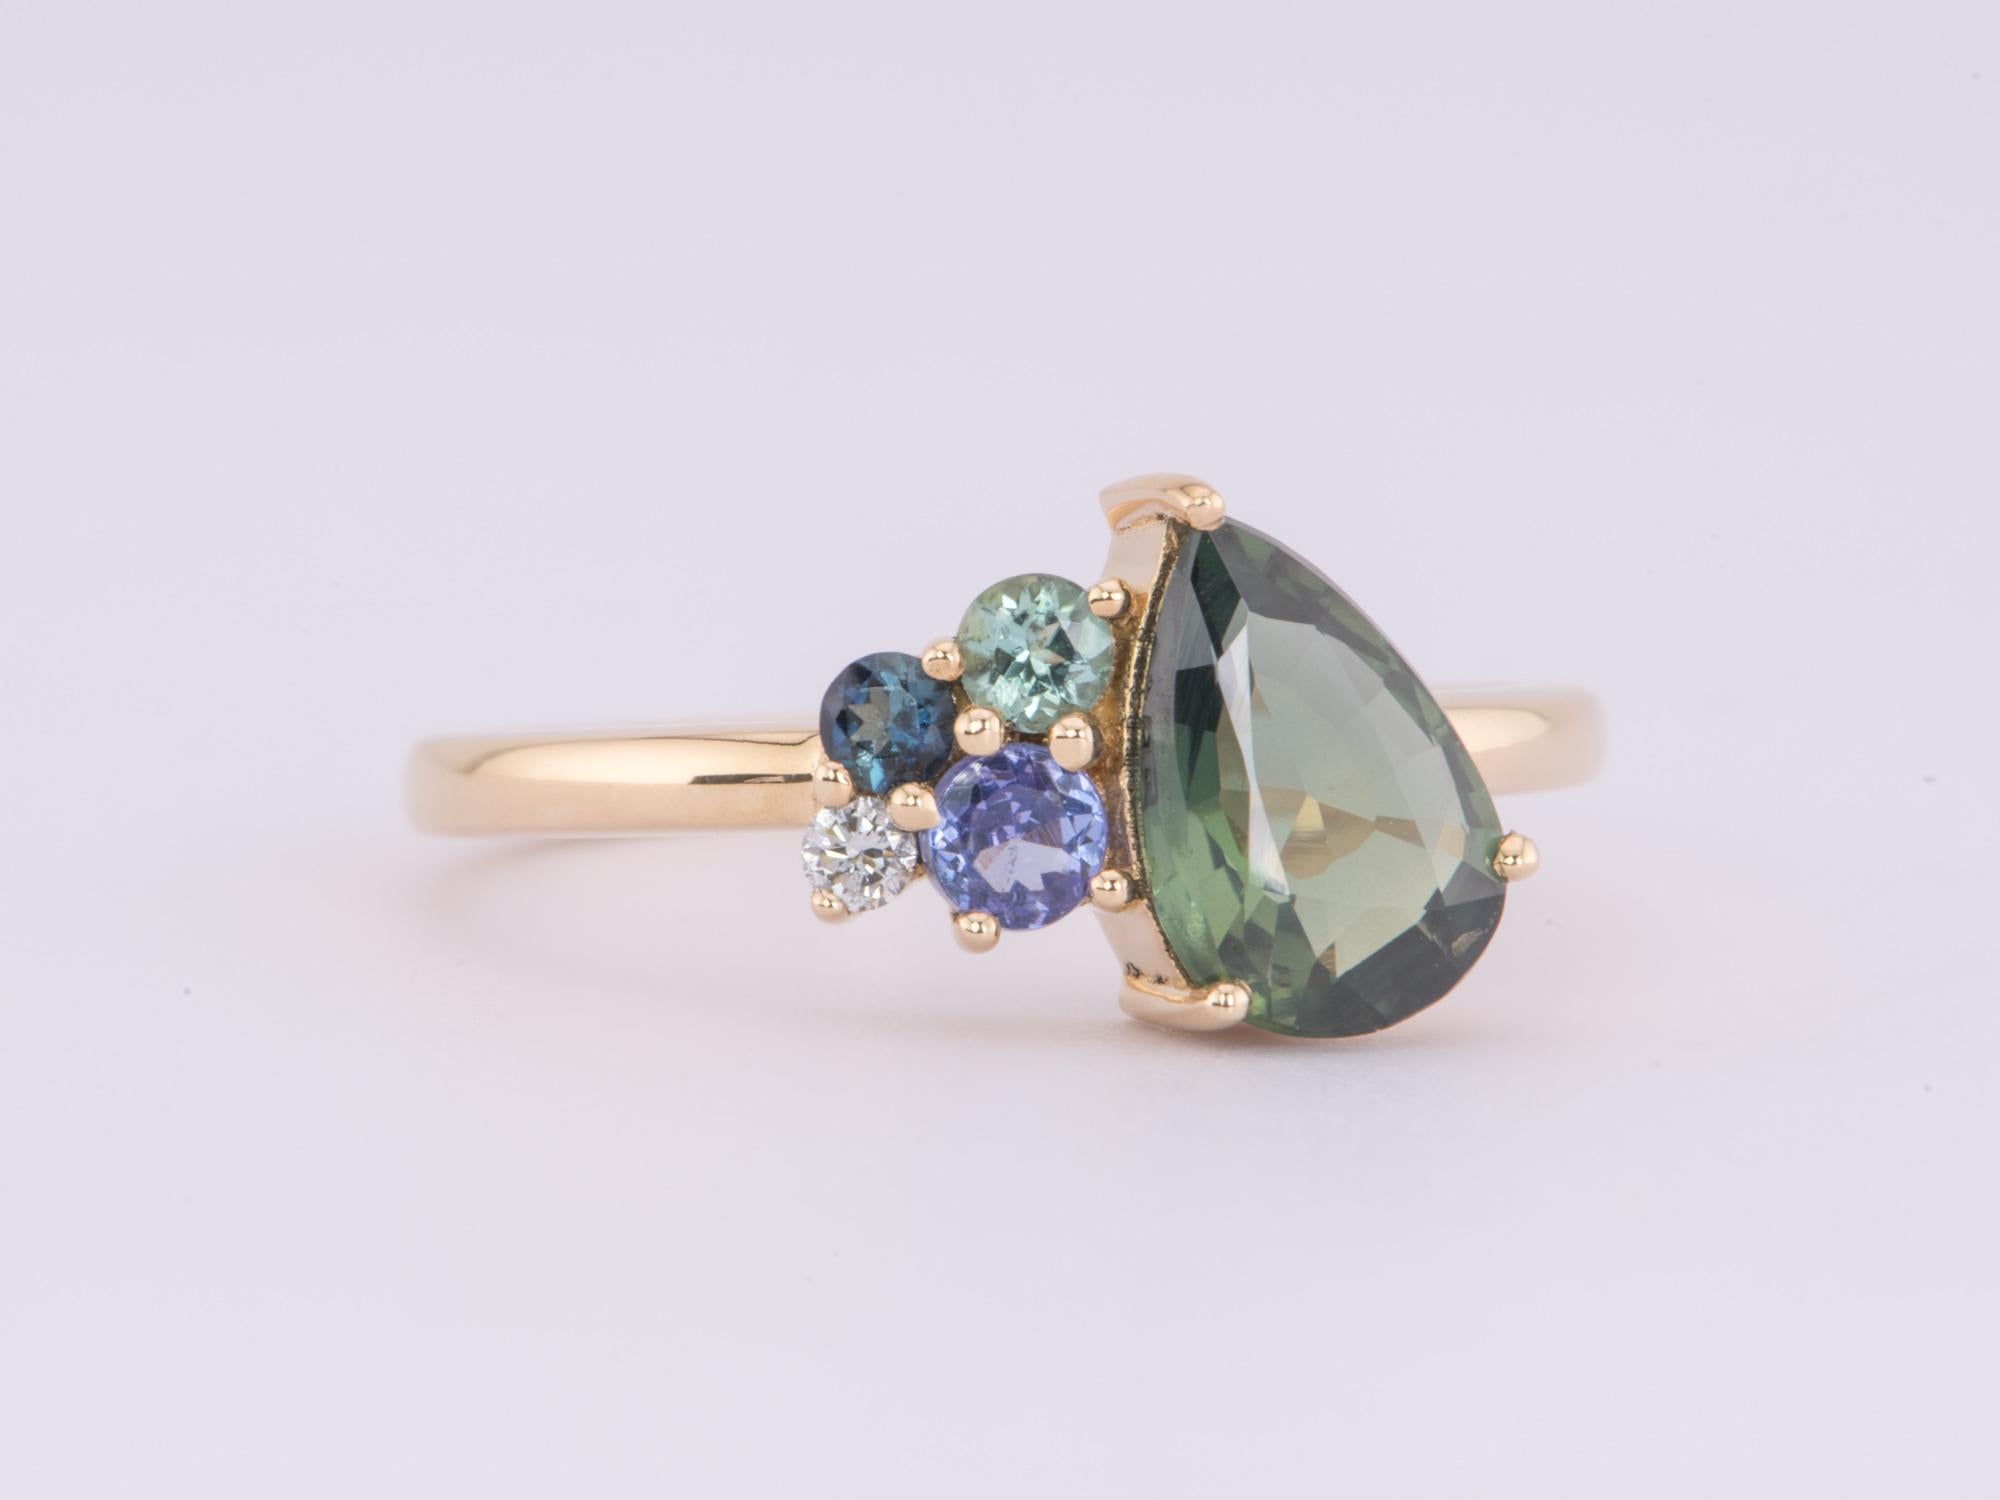   Declare your love with this uniquely asymmetrical 1.42ct Nigerian Teal Sapphire and Diamond Cluster Ring crafted from 14K gold! Its charming and sparkling cluster design will take their breath away! Will you say yes?

♥ This ring measures 11.7mm